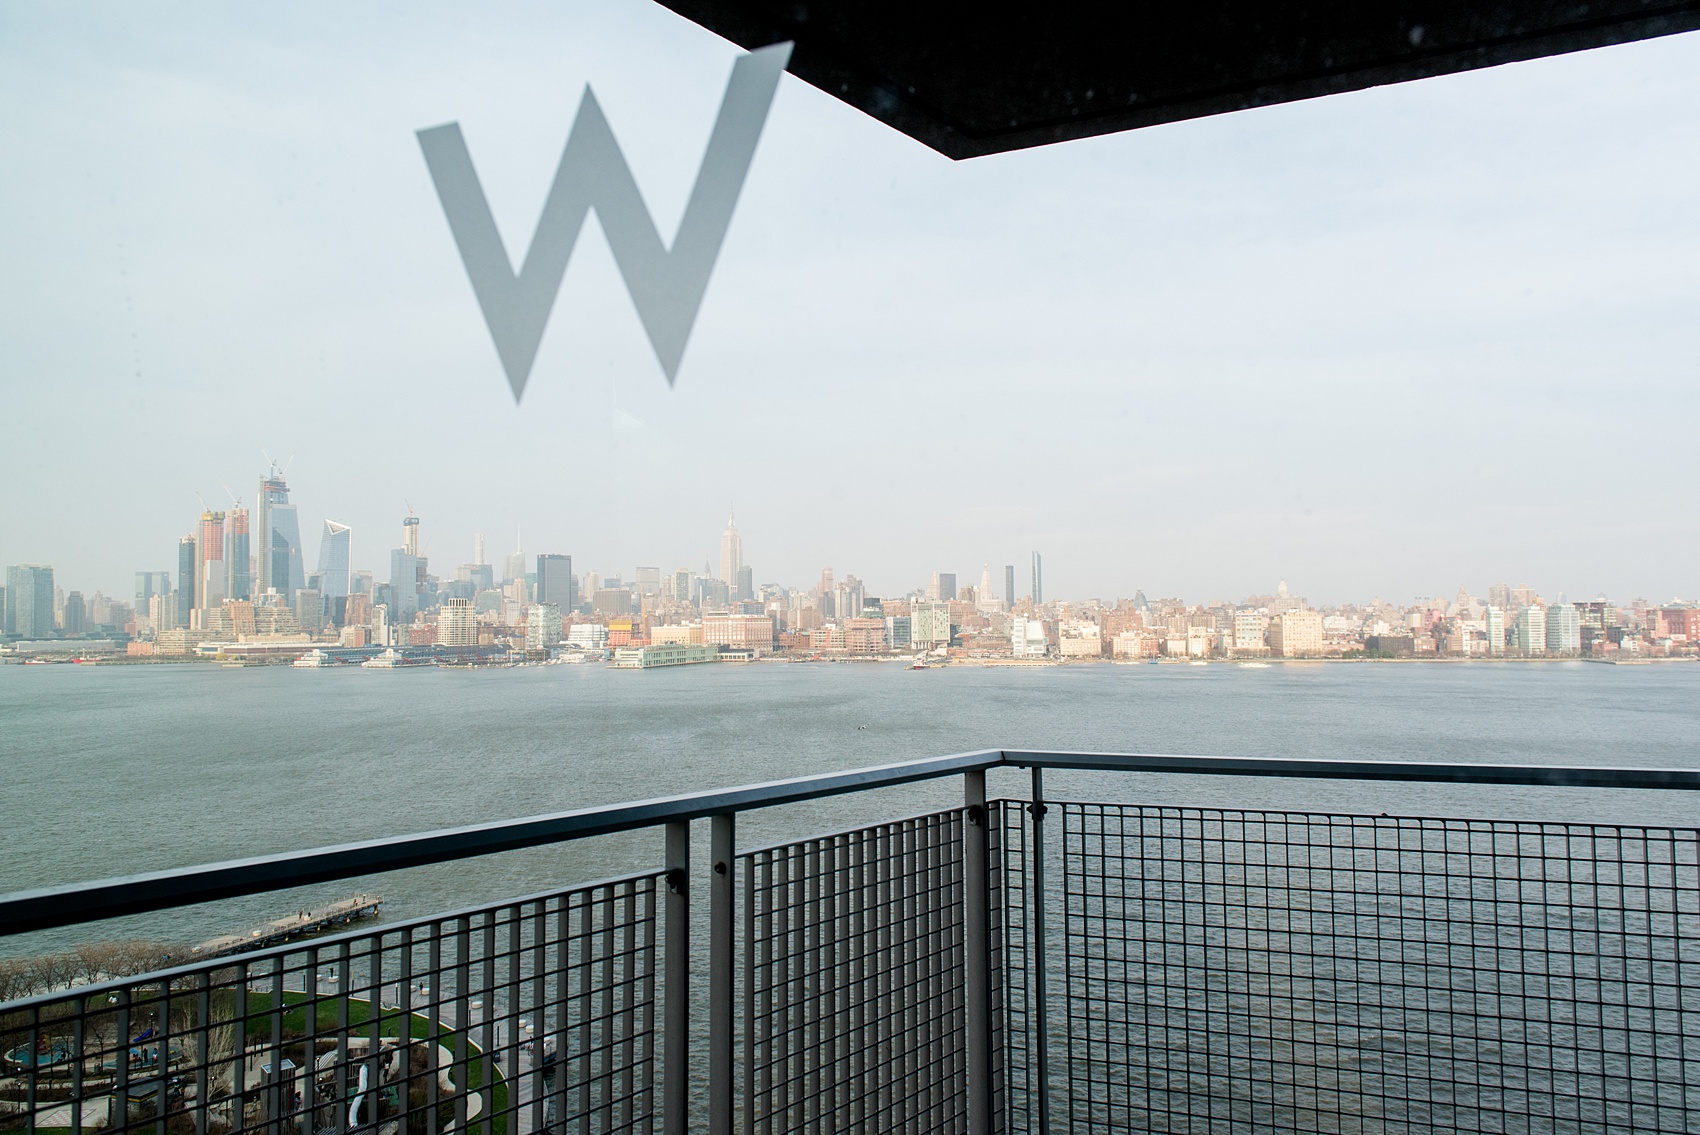 W Hoboken wedding photos by Mikkel Paige Photography. Pictures in this well known New Jersey venue with a view of the Manhattan skyline. #mikkelpaige #HobokenWedding #NewJerseyPhotographer #NewYorkCityPhotographer #NYCweddingphotographer #brideandgroomphotos #redpeonies #romanticwedding #springwedding #CityWedding